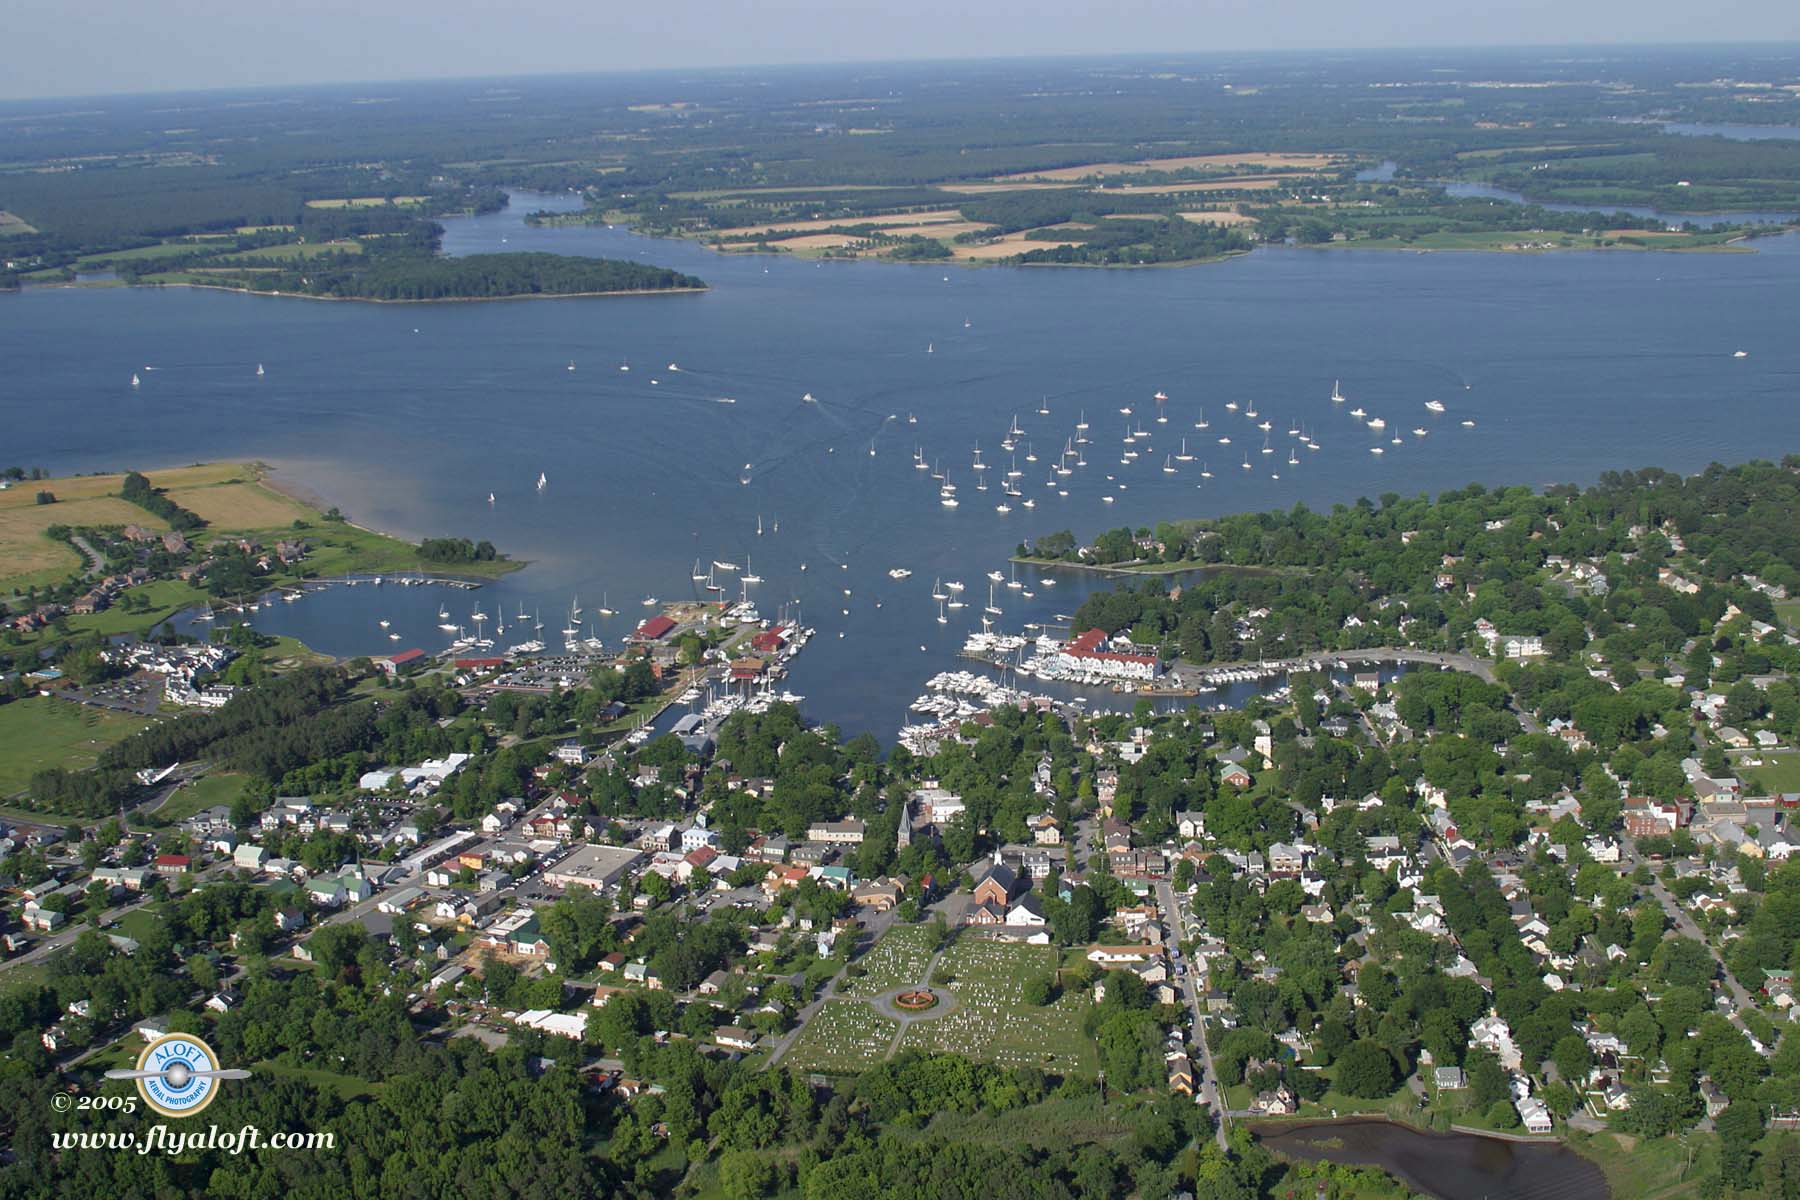 A view of the harbor from above.